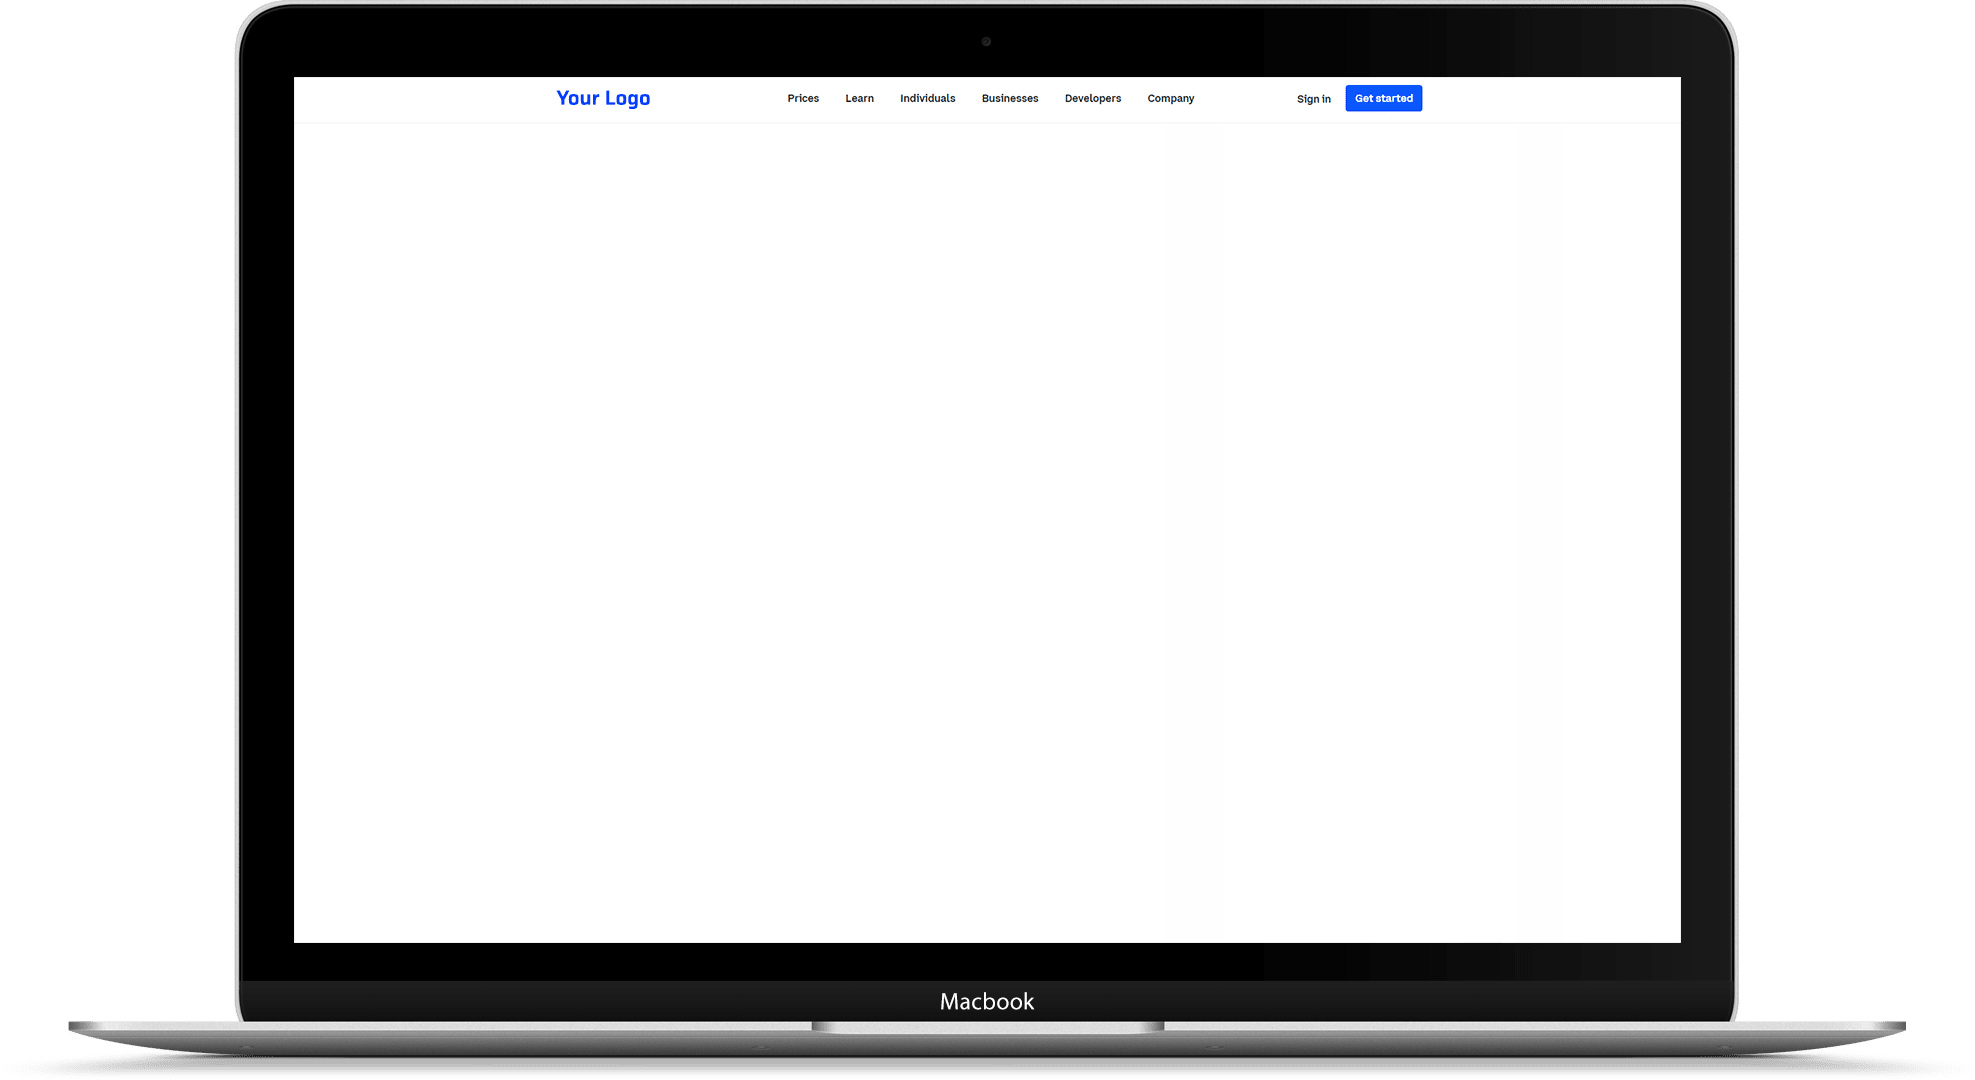 Coinbase clone laptop front view